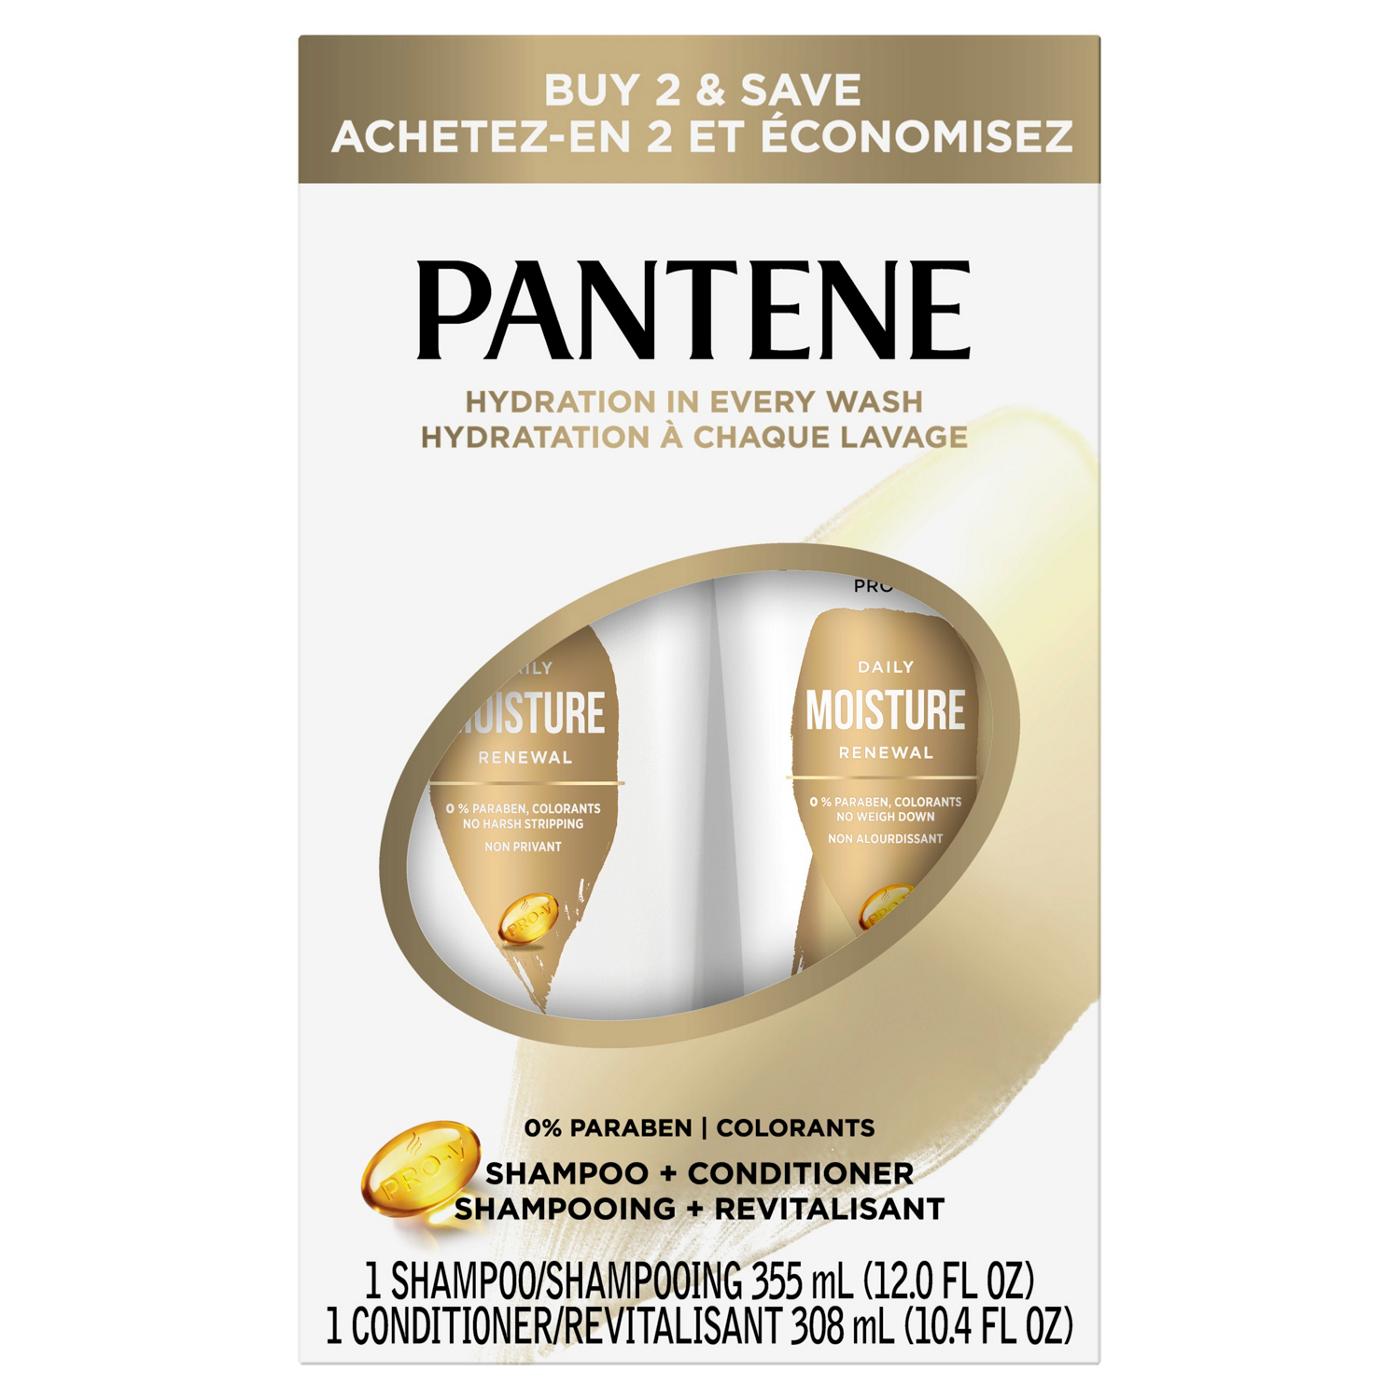 Pantene Pro-V Daily Moisture Renewal Shampoo + Conditioner - Dual Pack; image 1 of 11